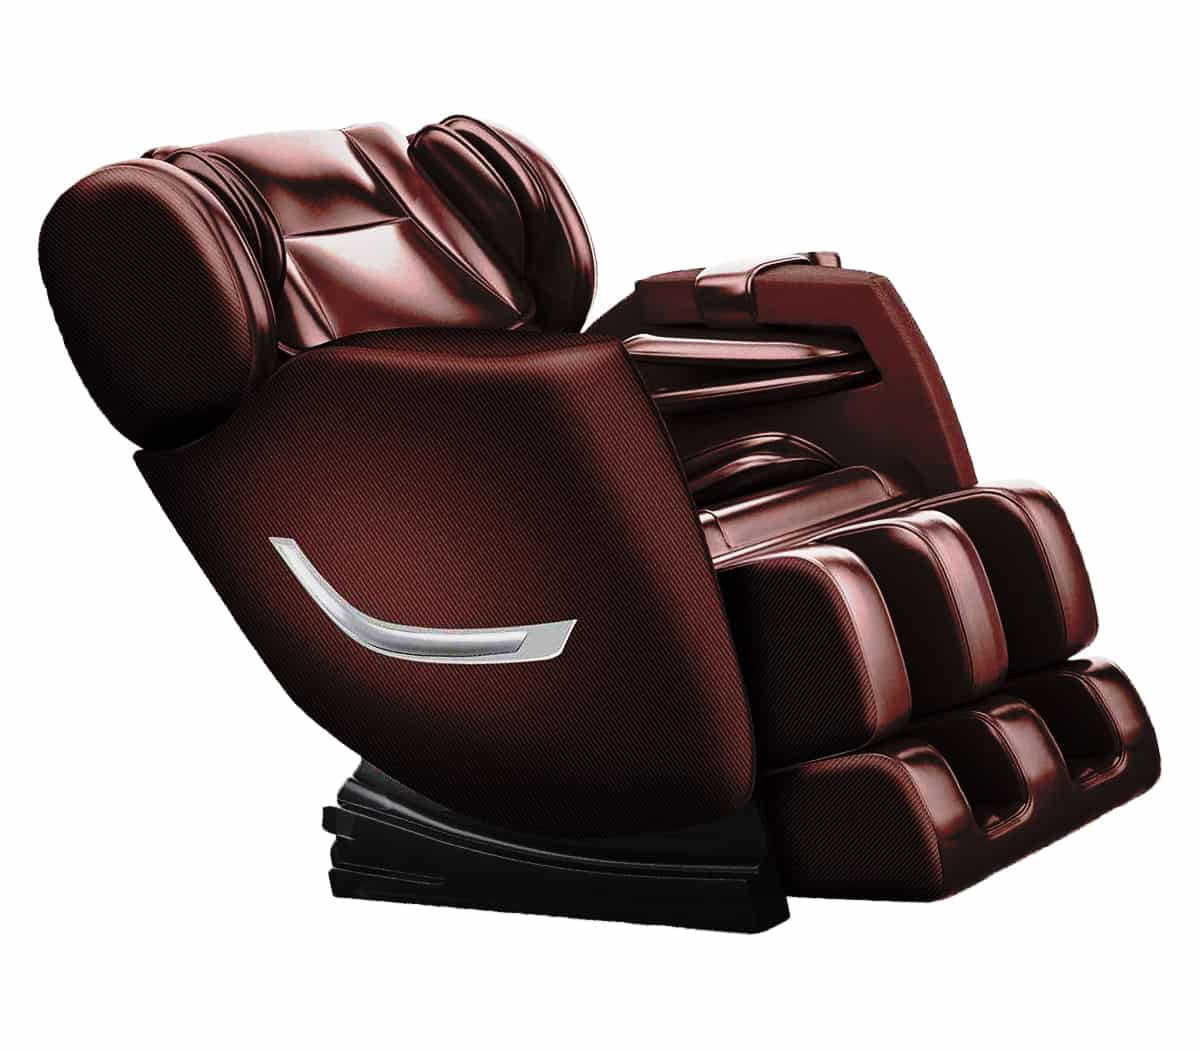 Real Relax Recliner Image